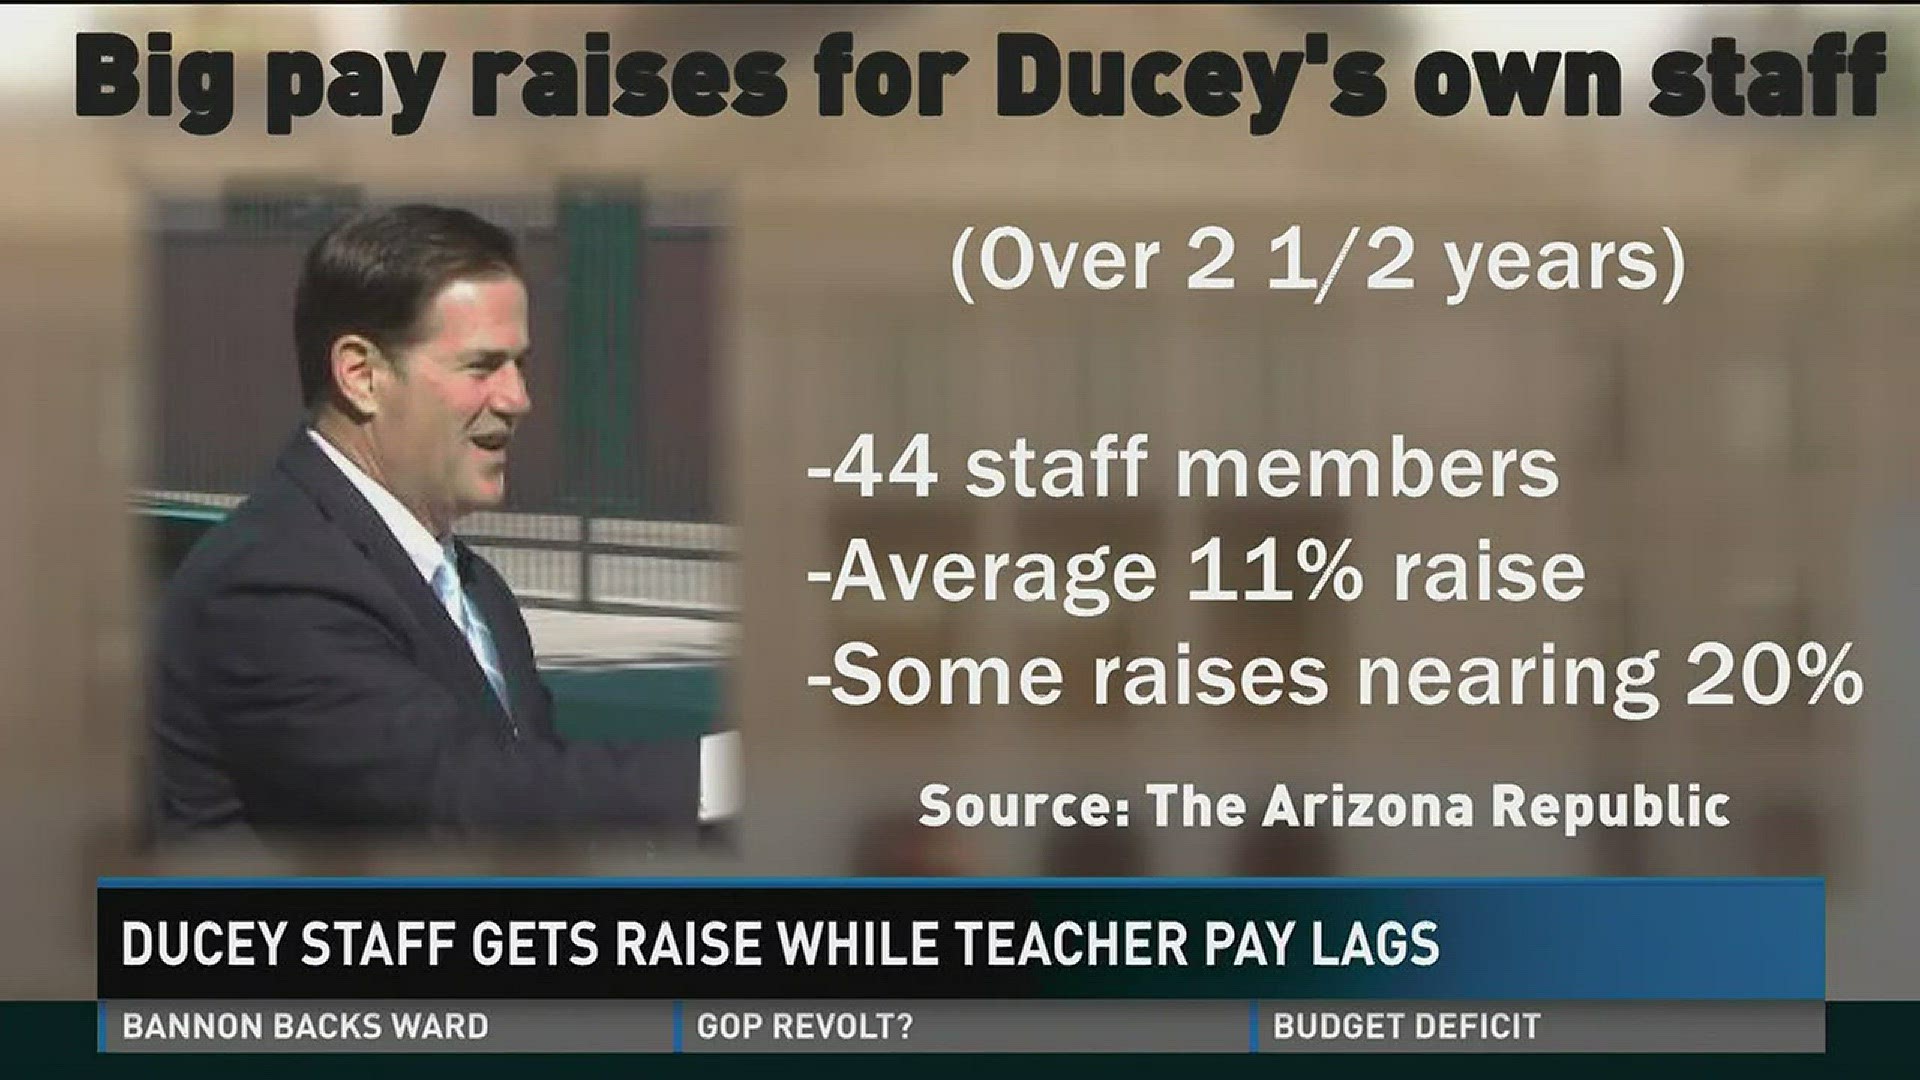 Does Ducey deserve the criticism he's getting for boosting his staff's paychecks, and will it linger into his anticipated 2018 re-election bid?